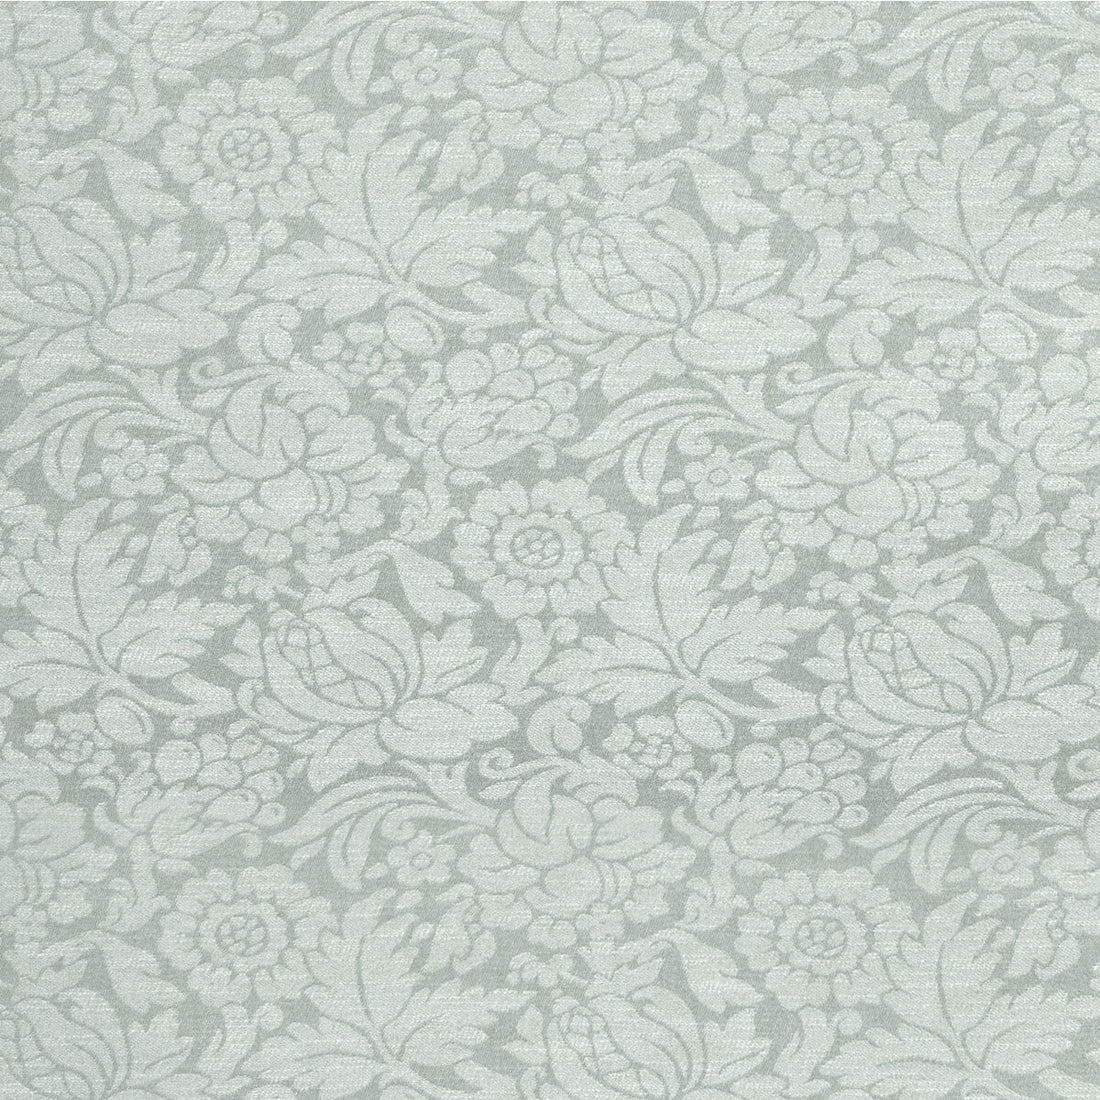 Shabby Damask fabric in mist color - pattern 36870.15.0 - by Kravet Couture in the Atelier Weaves collection